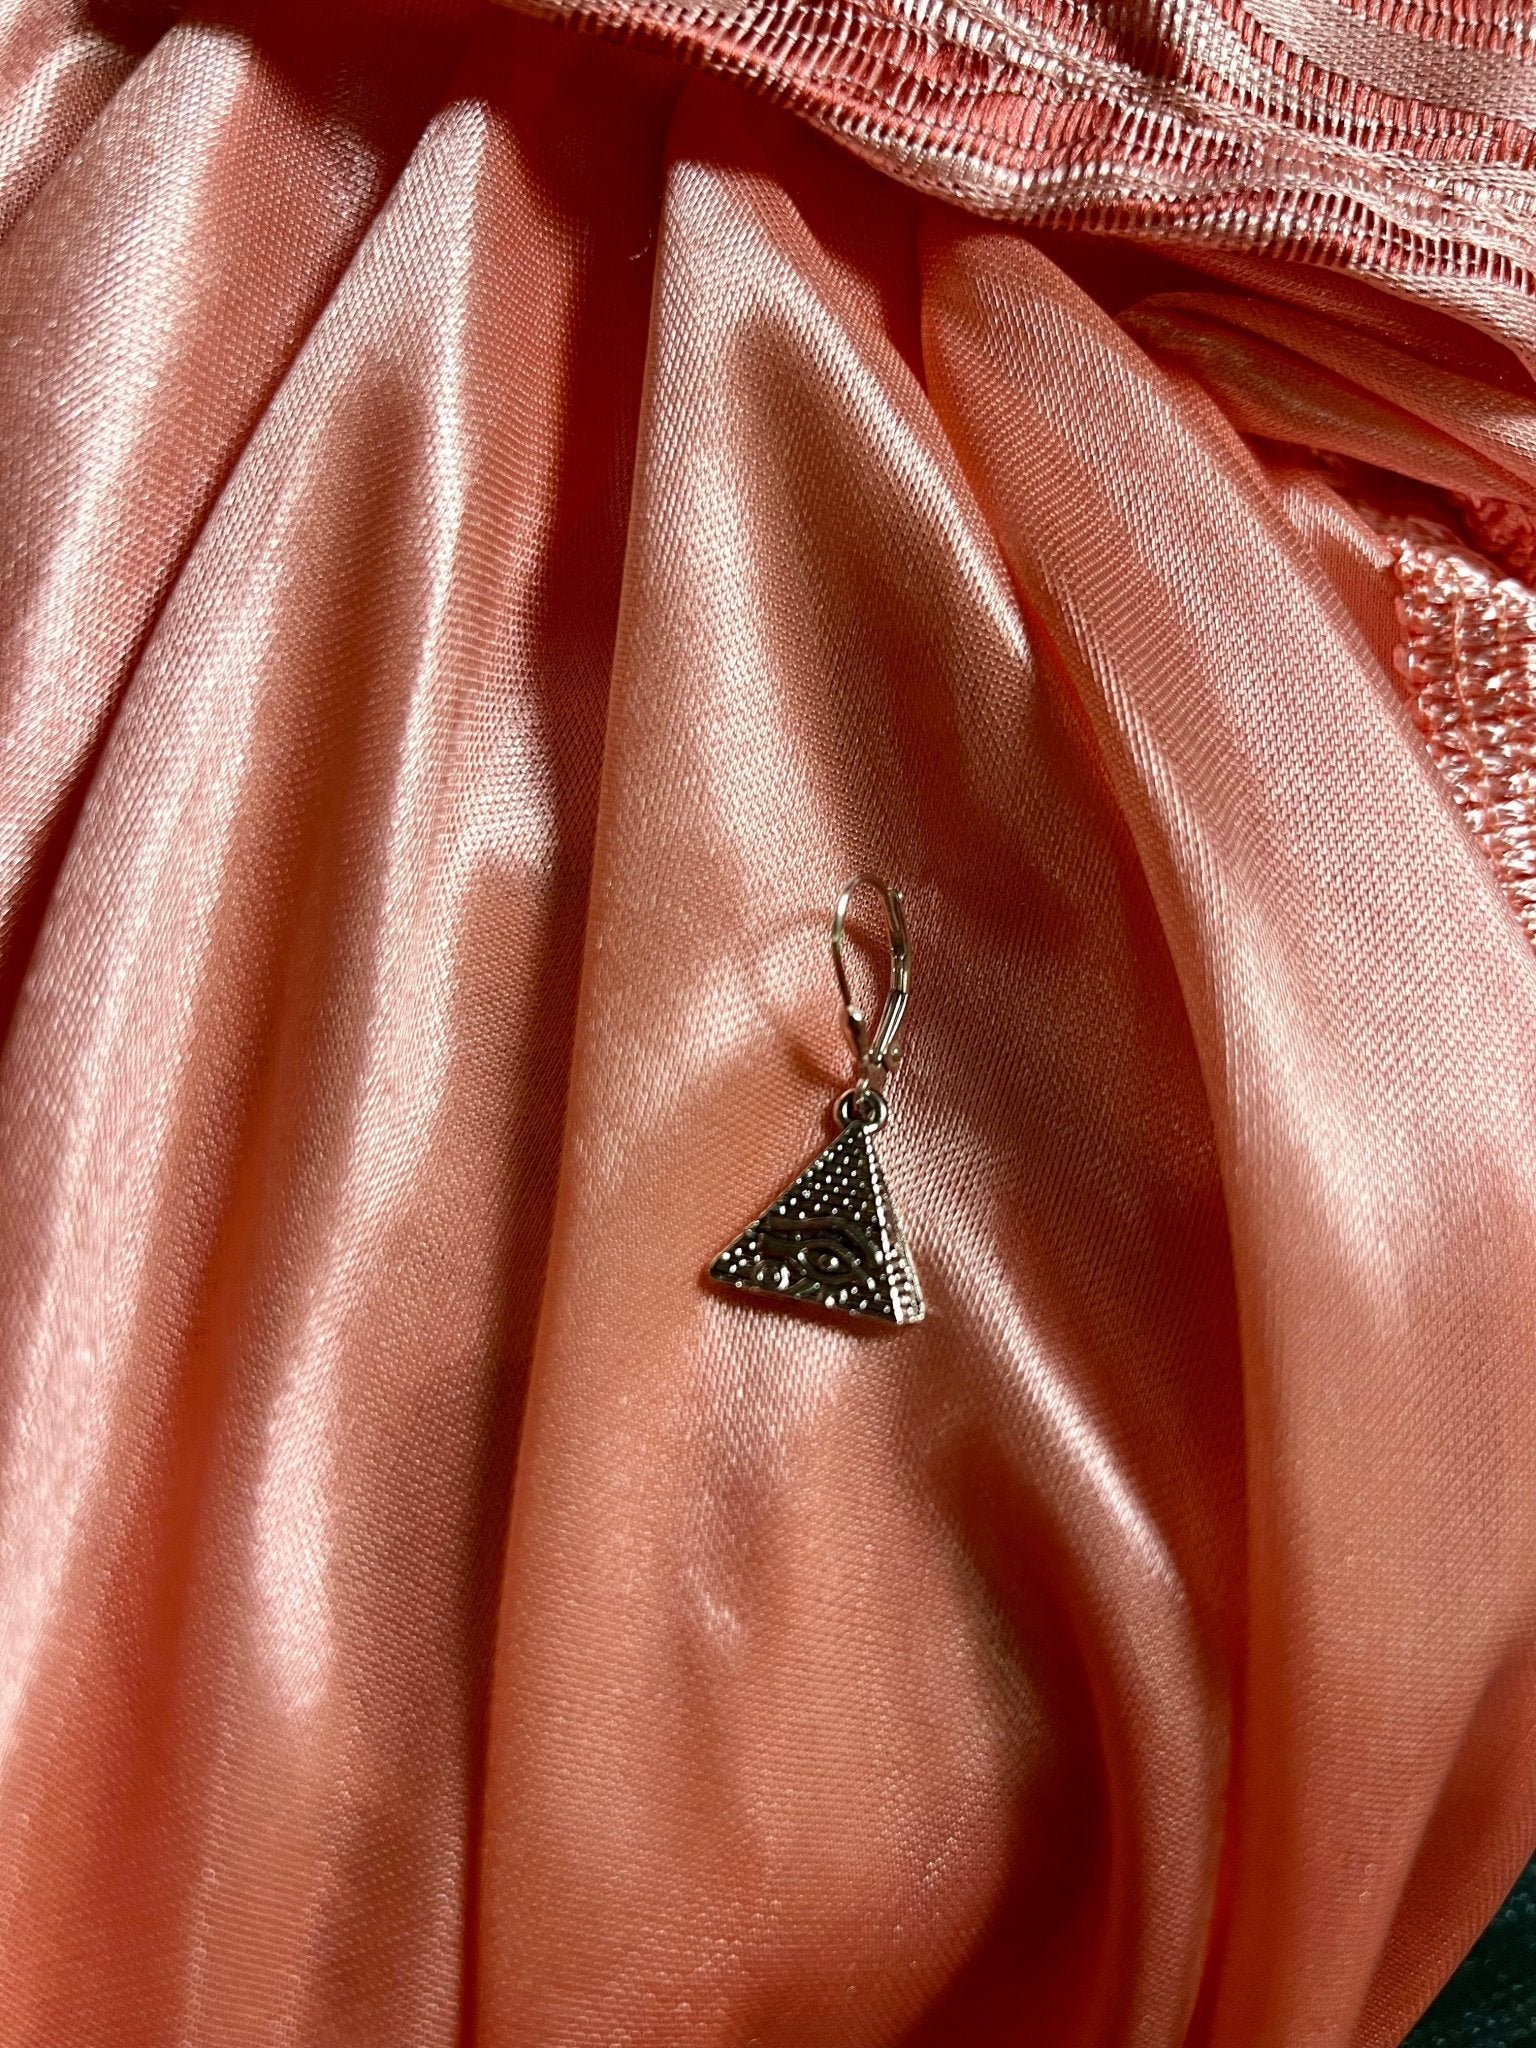 Silver Pyramid Earring - The Nightshift